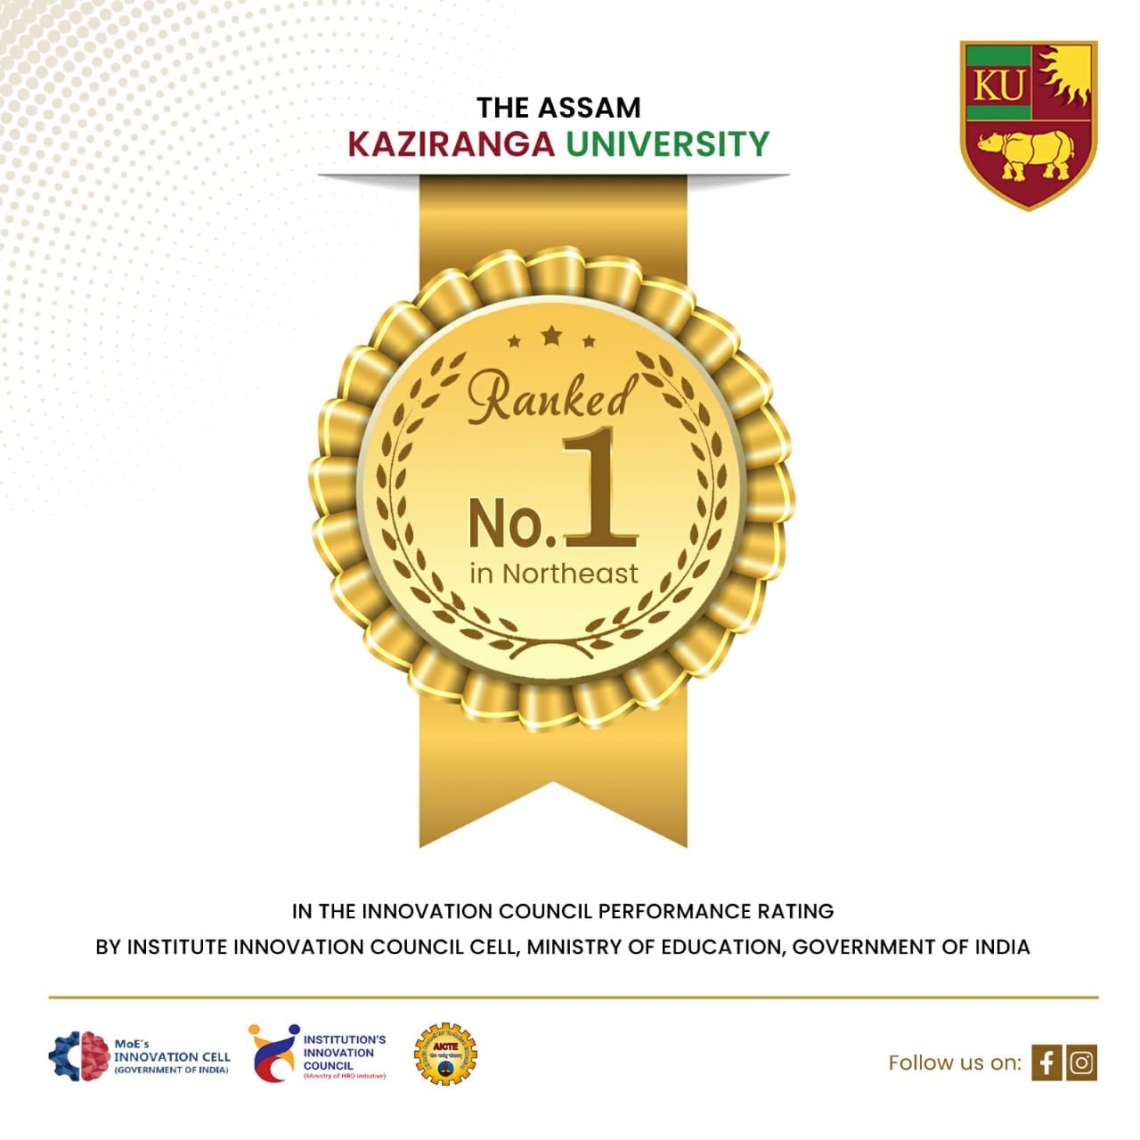 KU have achieved the top spot in the Innovation Council Performance Rating conducted by the Institute Innovation Council Cell, Ministry of Education, Government of India.